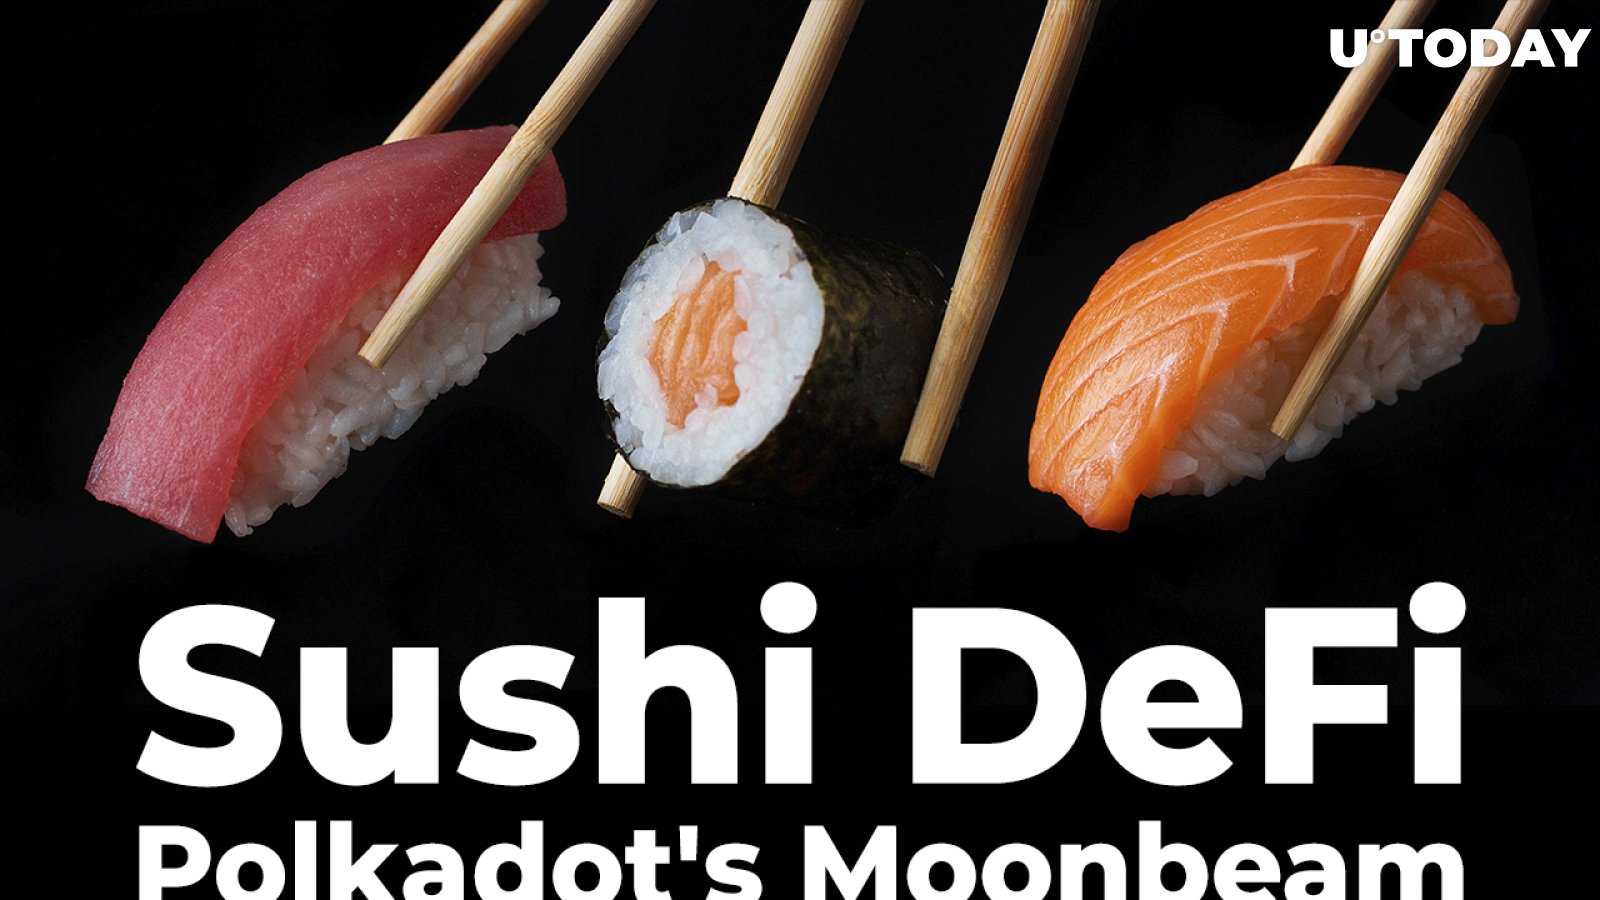 Sushi DeFi Heavyweight Comes to Polkadot's Moonbeam, Teases IDO and NFT Products